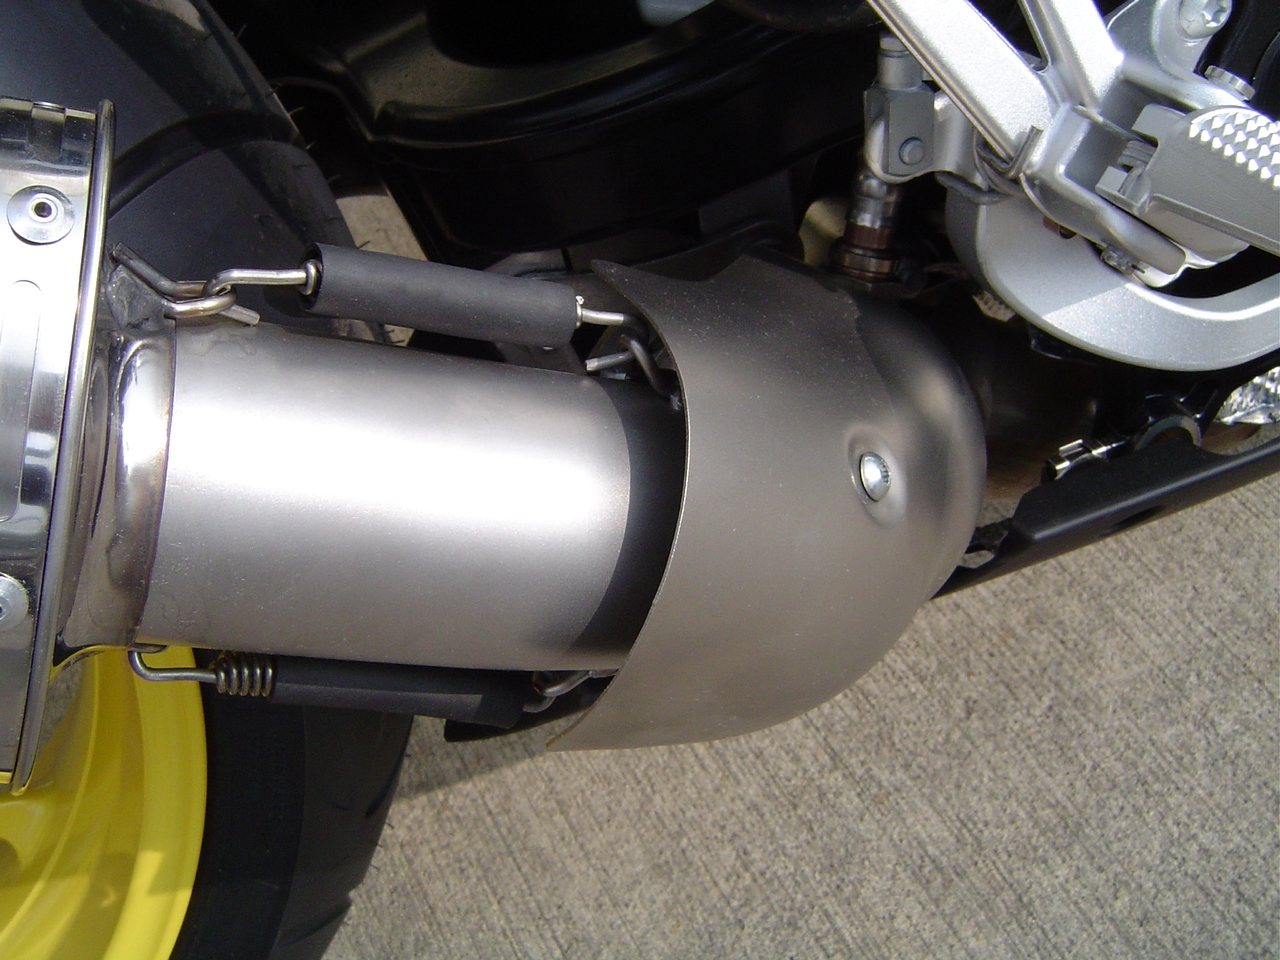 Exhaust system compatible with Bmw K 1300 Gt 2009-2011, Albus Ceramic, Homologated legal slip-on exhaust including removable db killer and link pipe 